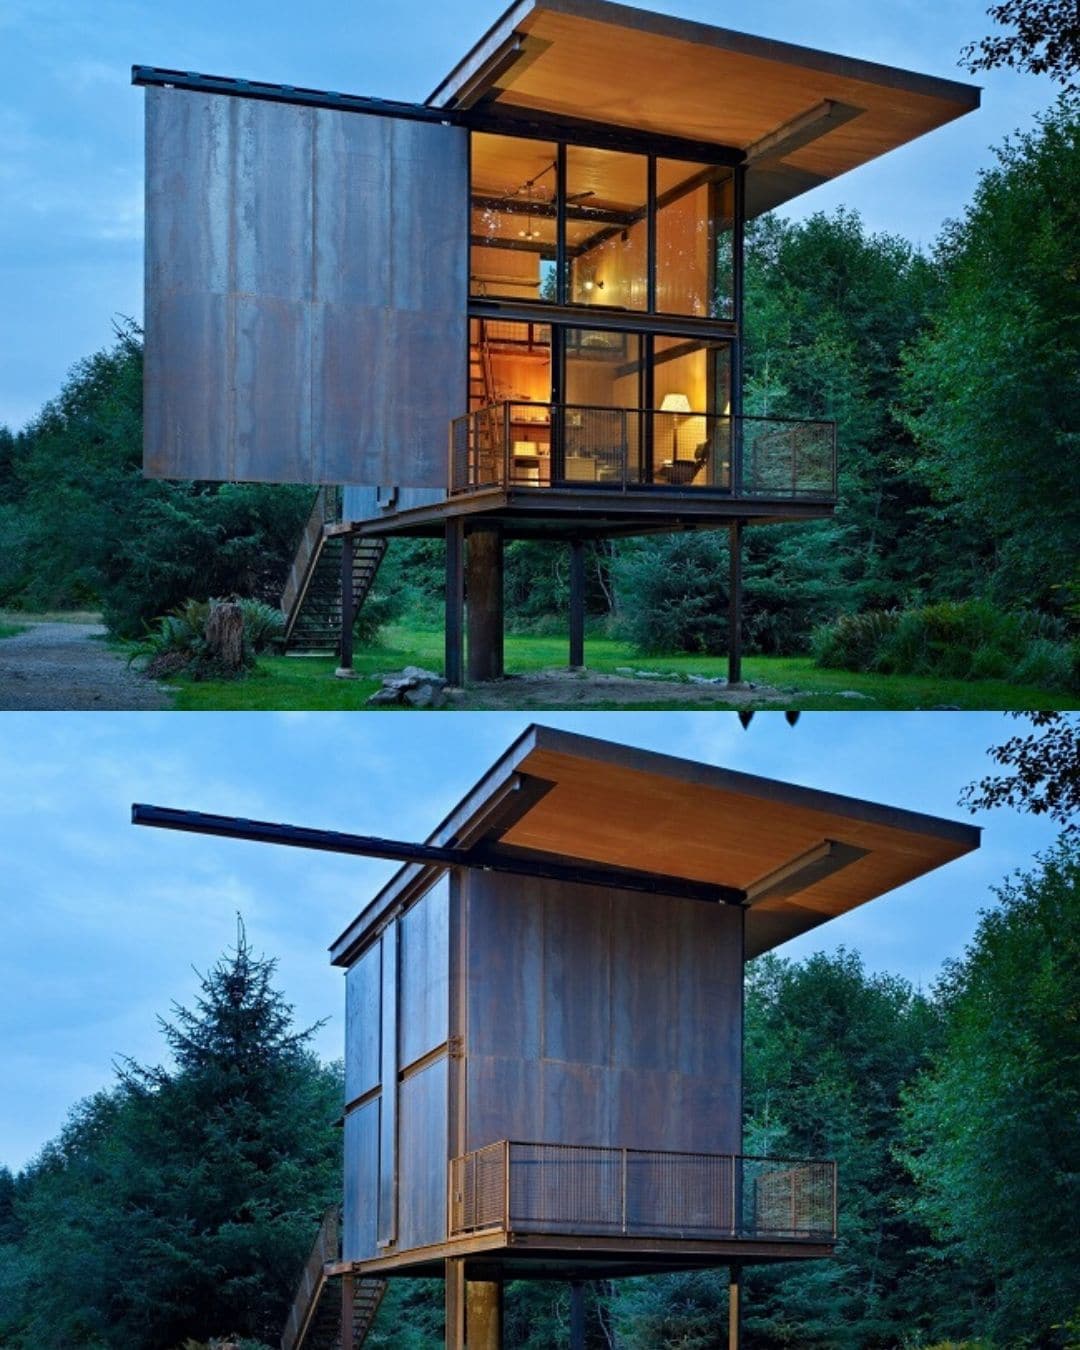 The Sol Duc Cabin